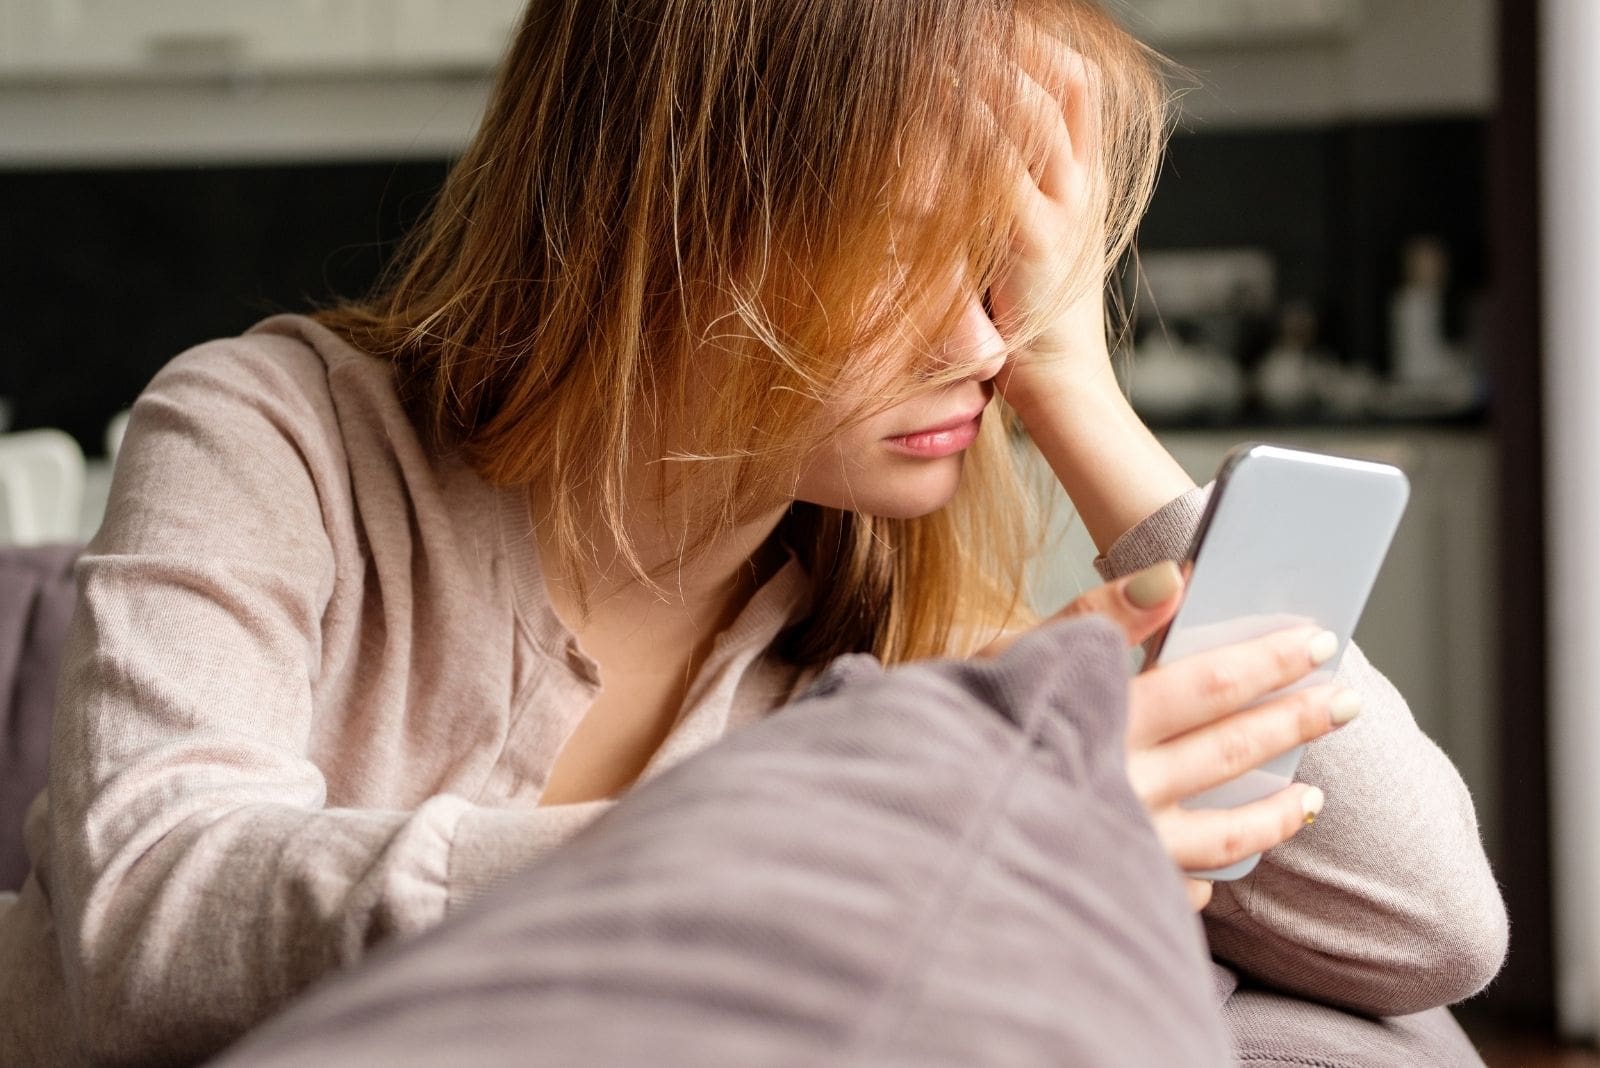 woman just woke up looking at the her smartphone leaning on her couch